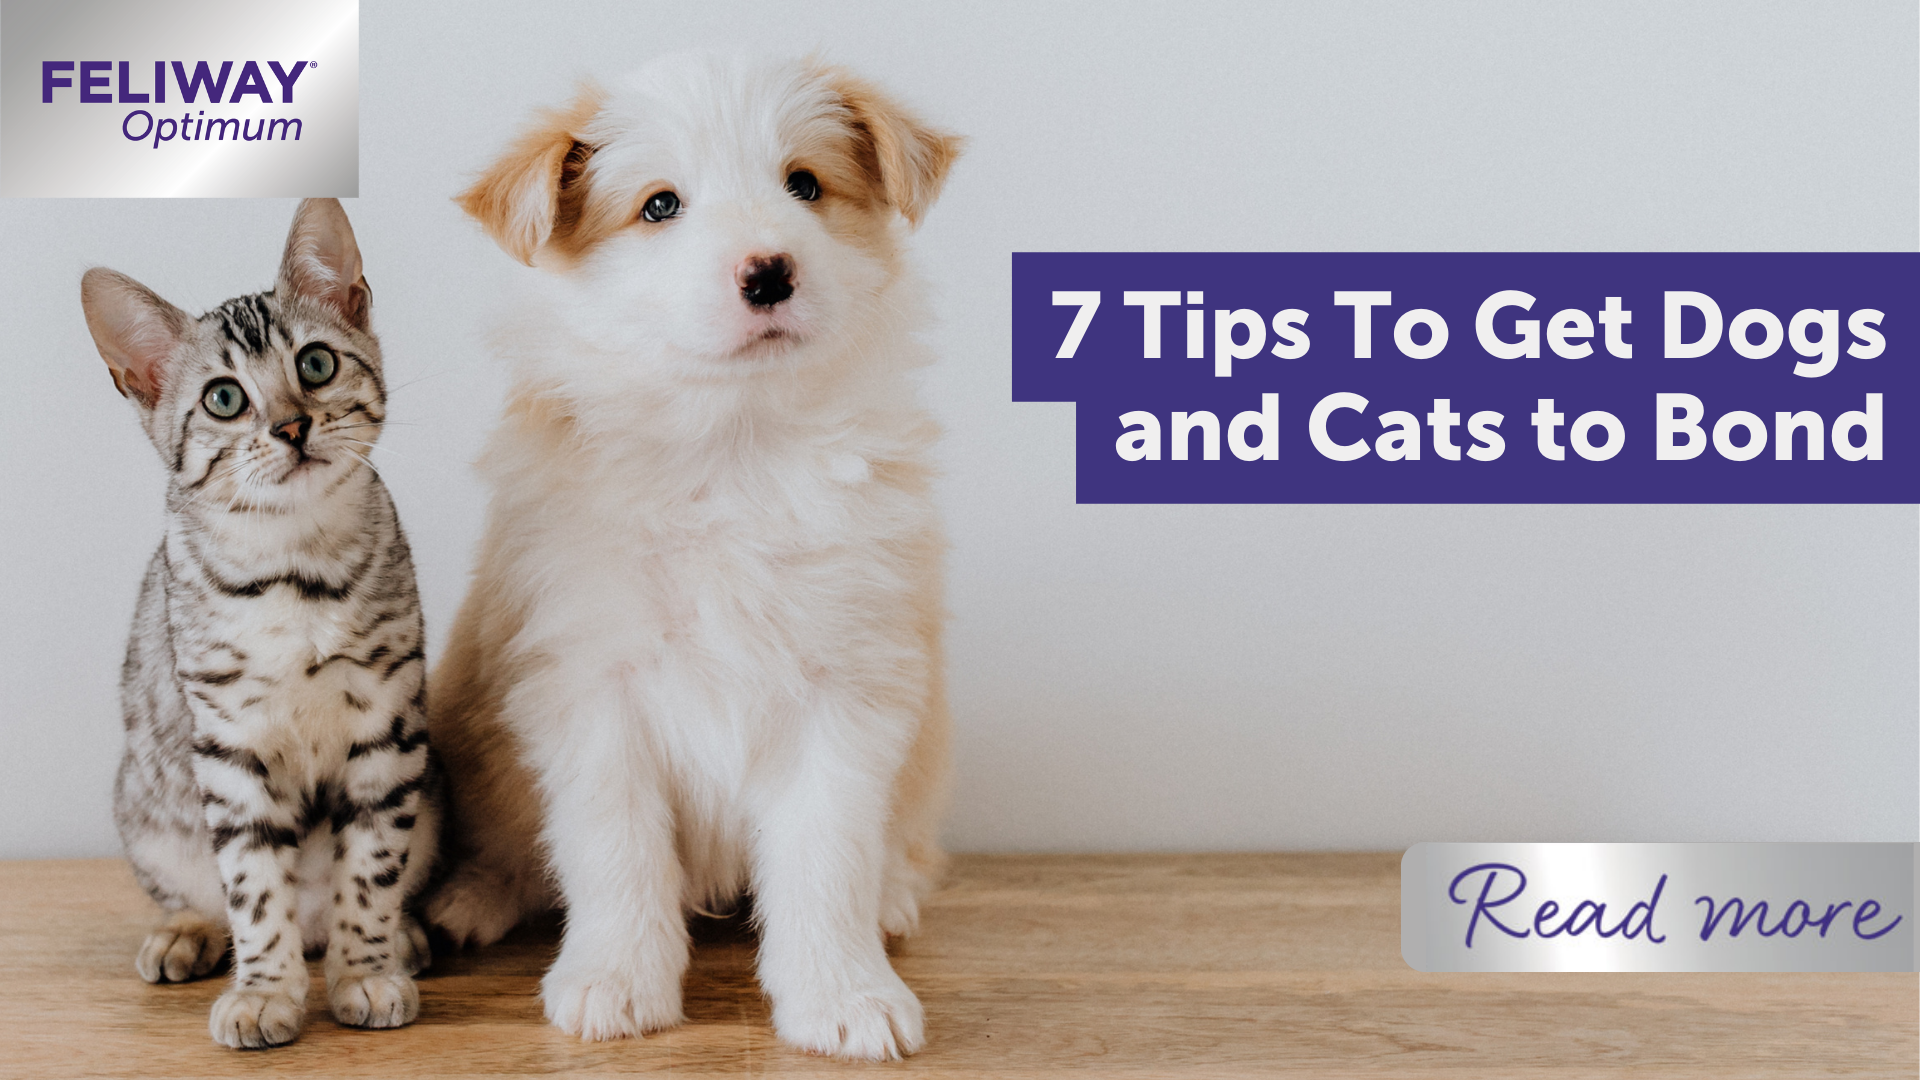 7 Tips To Get Dogs and Cats to Bond